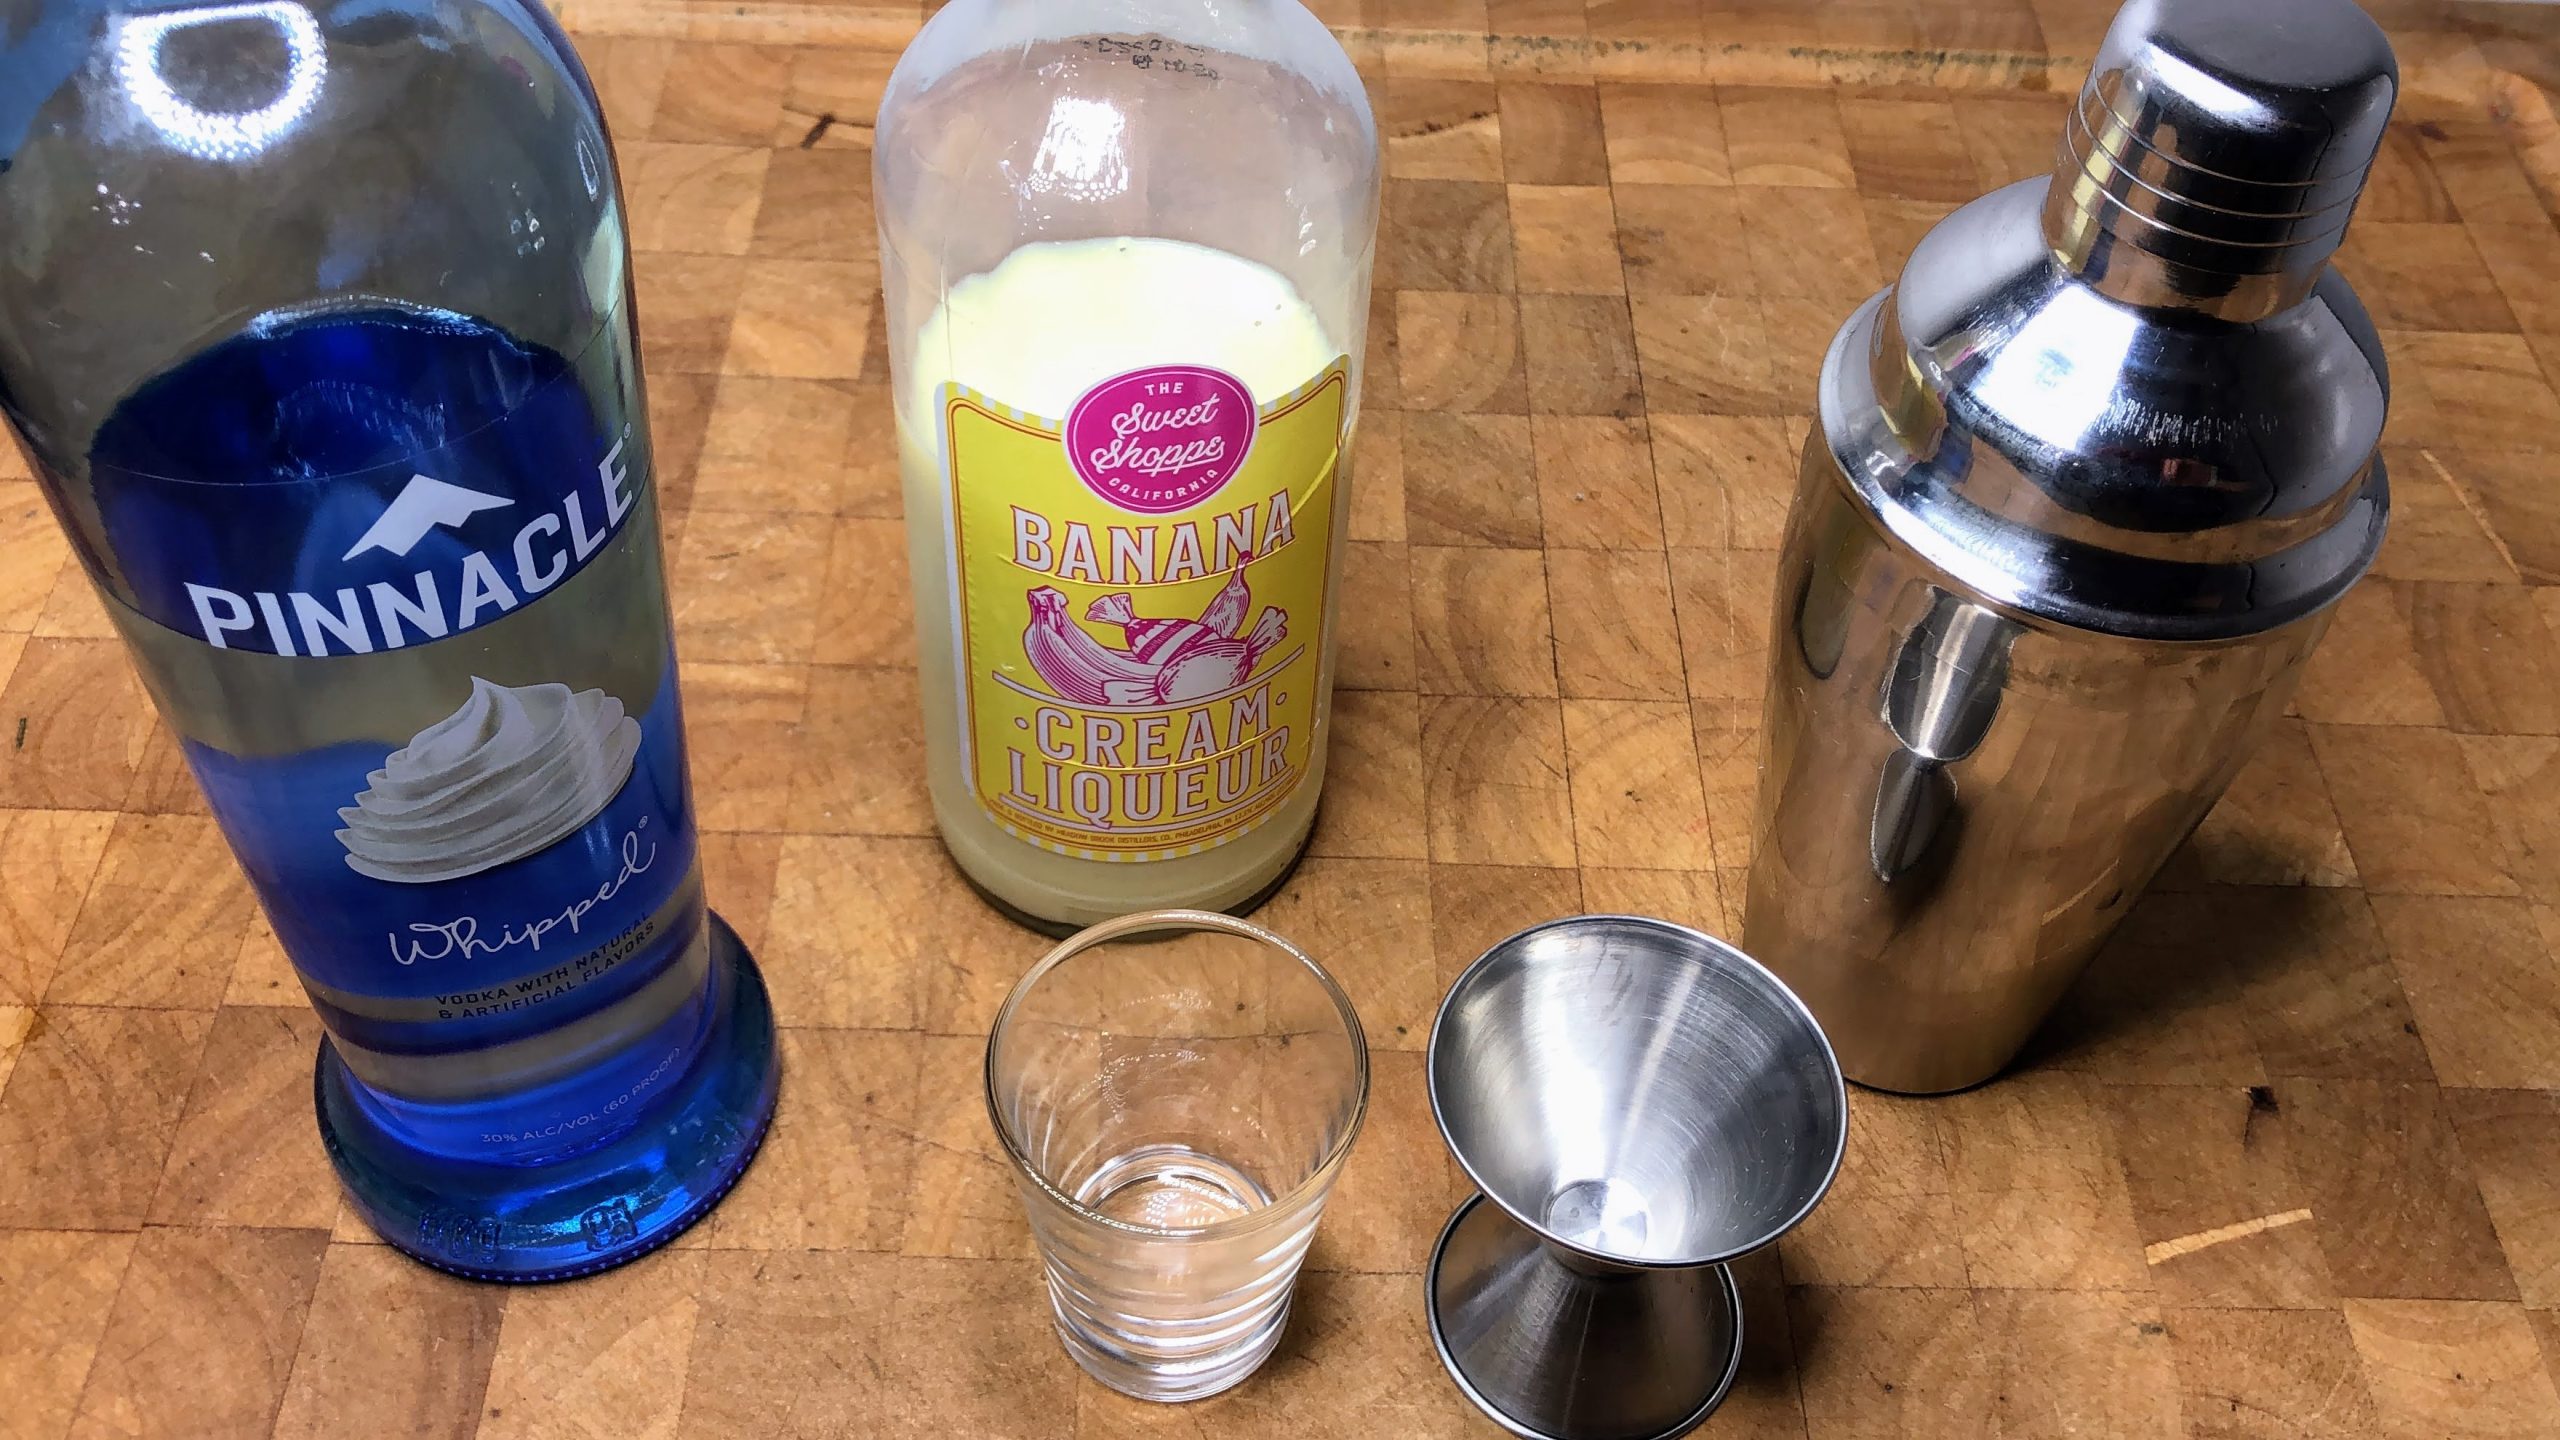 Bottles of whipped cream vodka and banana liqueur next to cocktail shaker, shot glass and jigger.